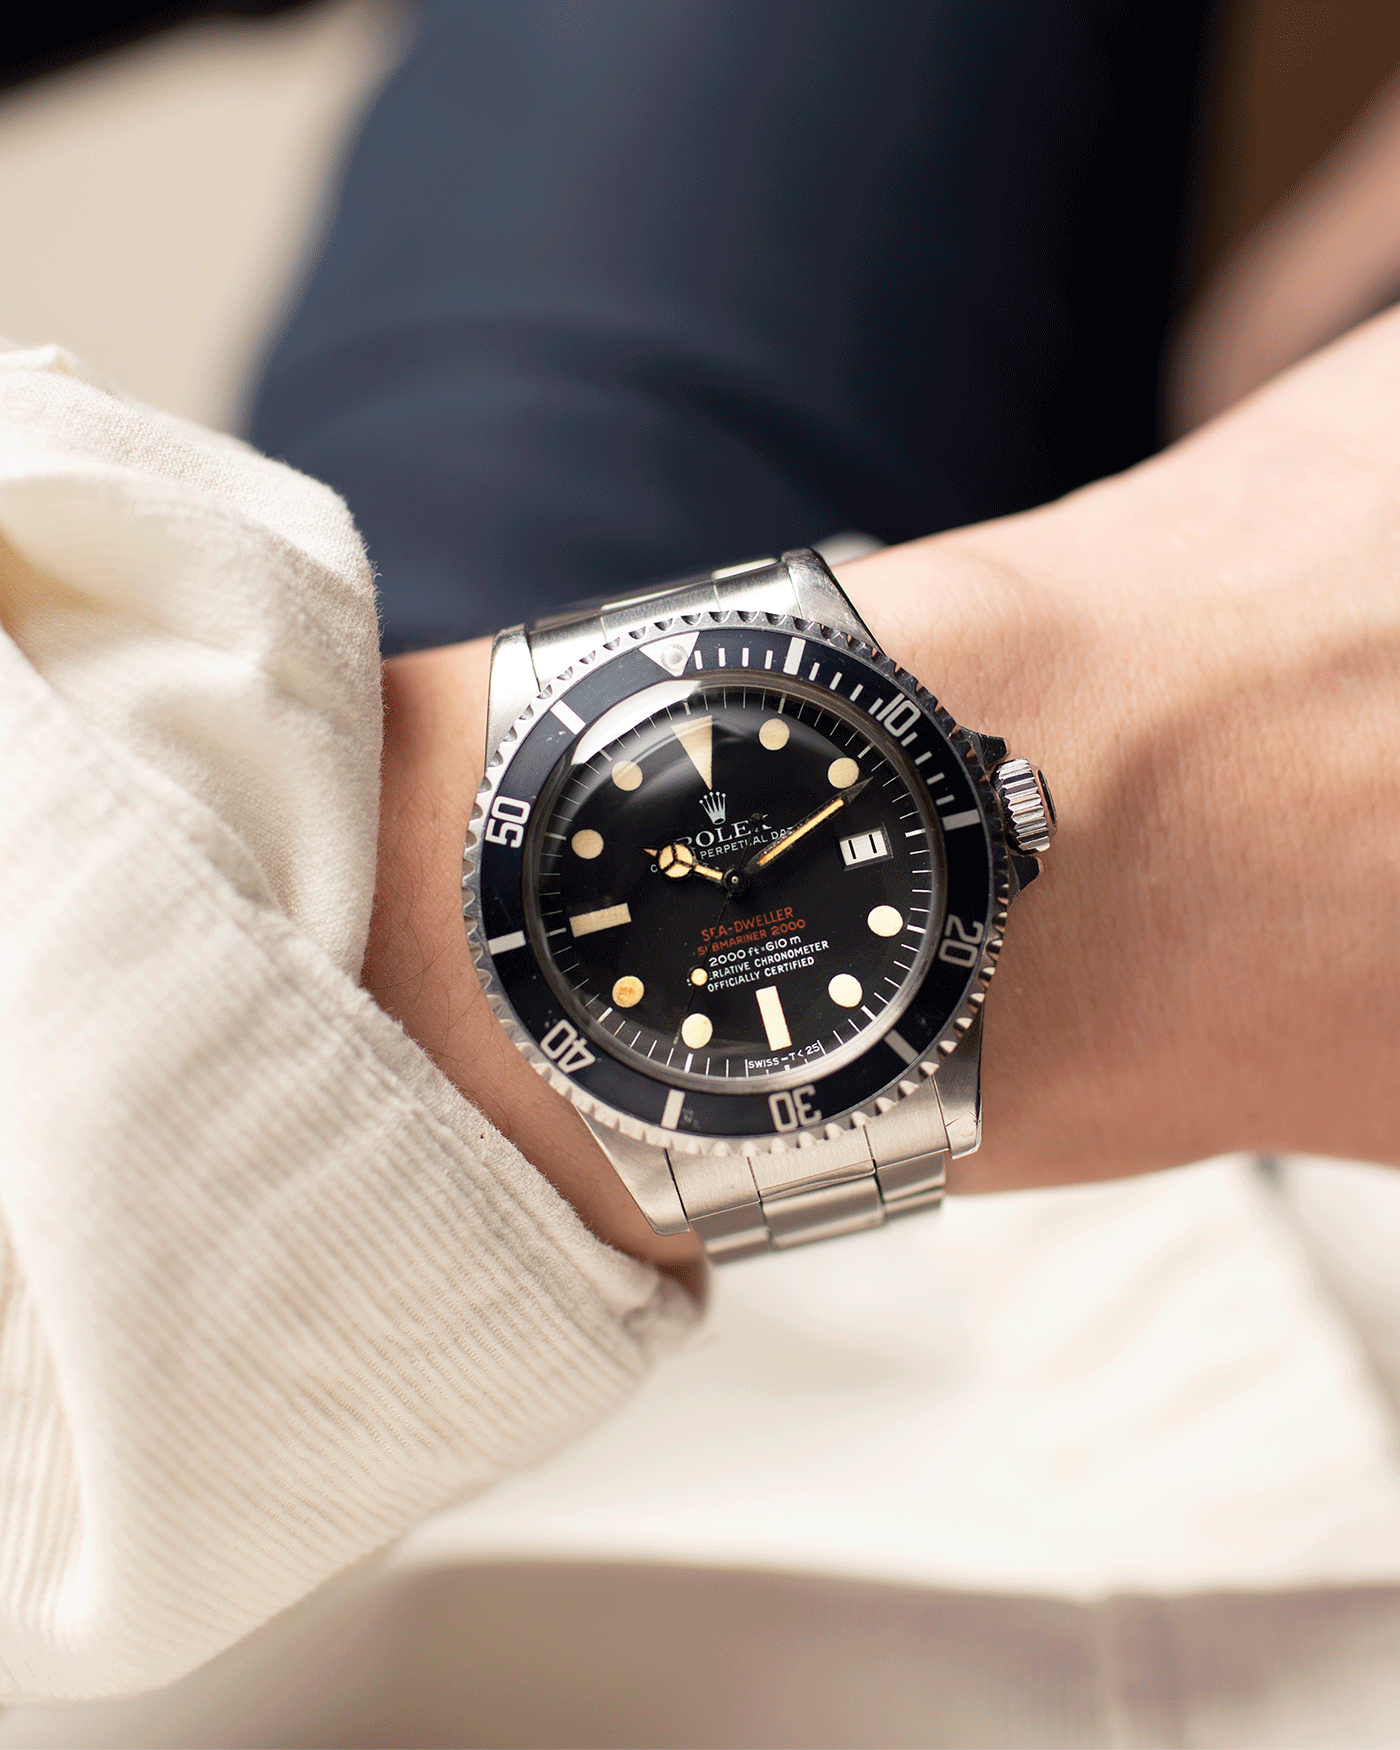 Rolex Double Red Sea Dweller Mk IV Sport Diver Watch | S.Song Vintage Watches For Sale